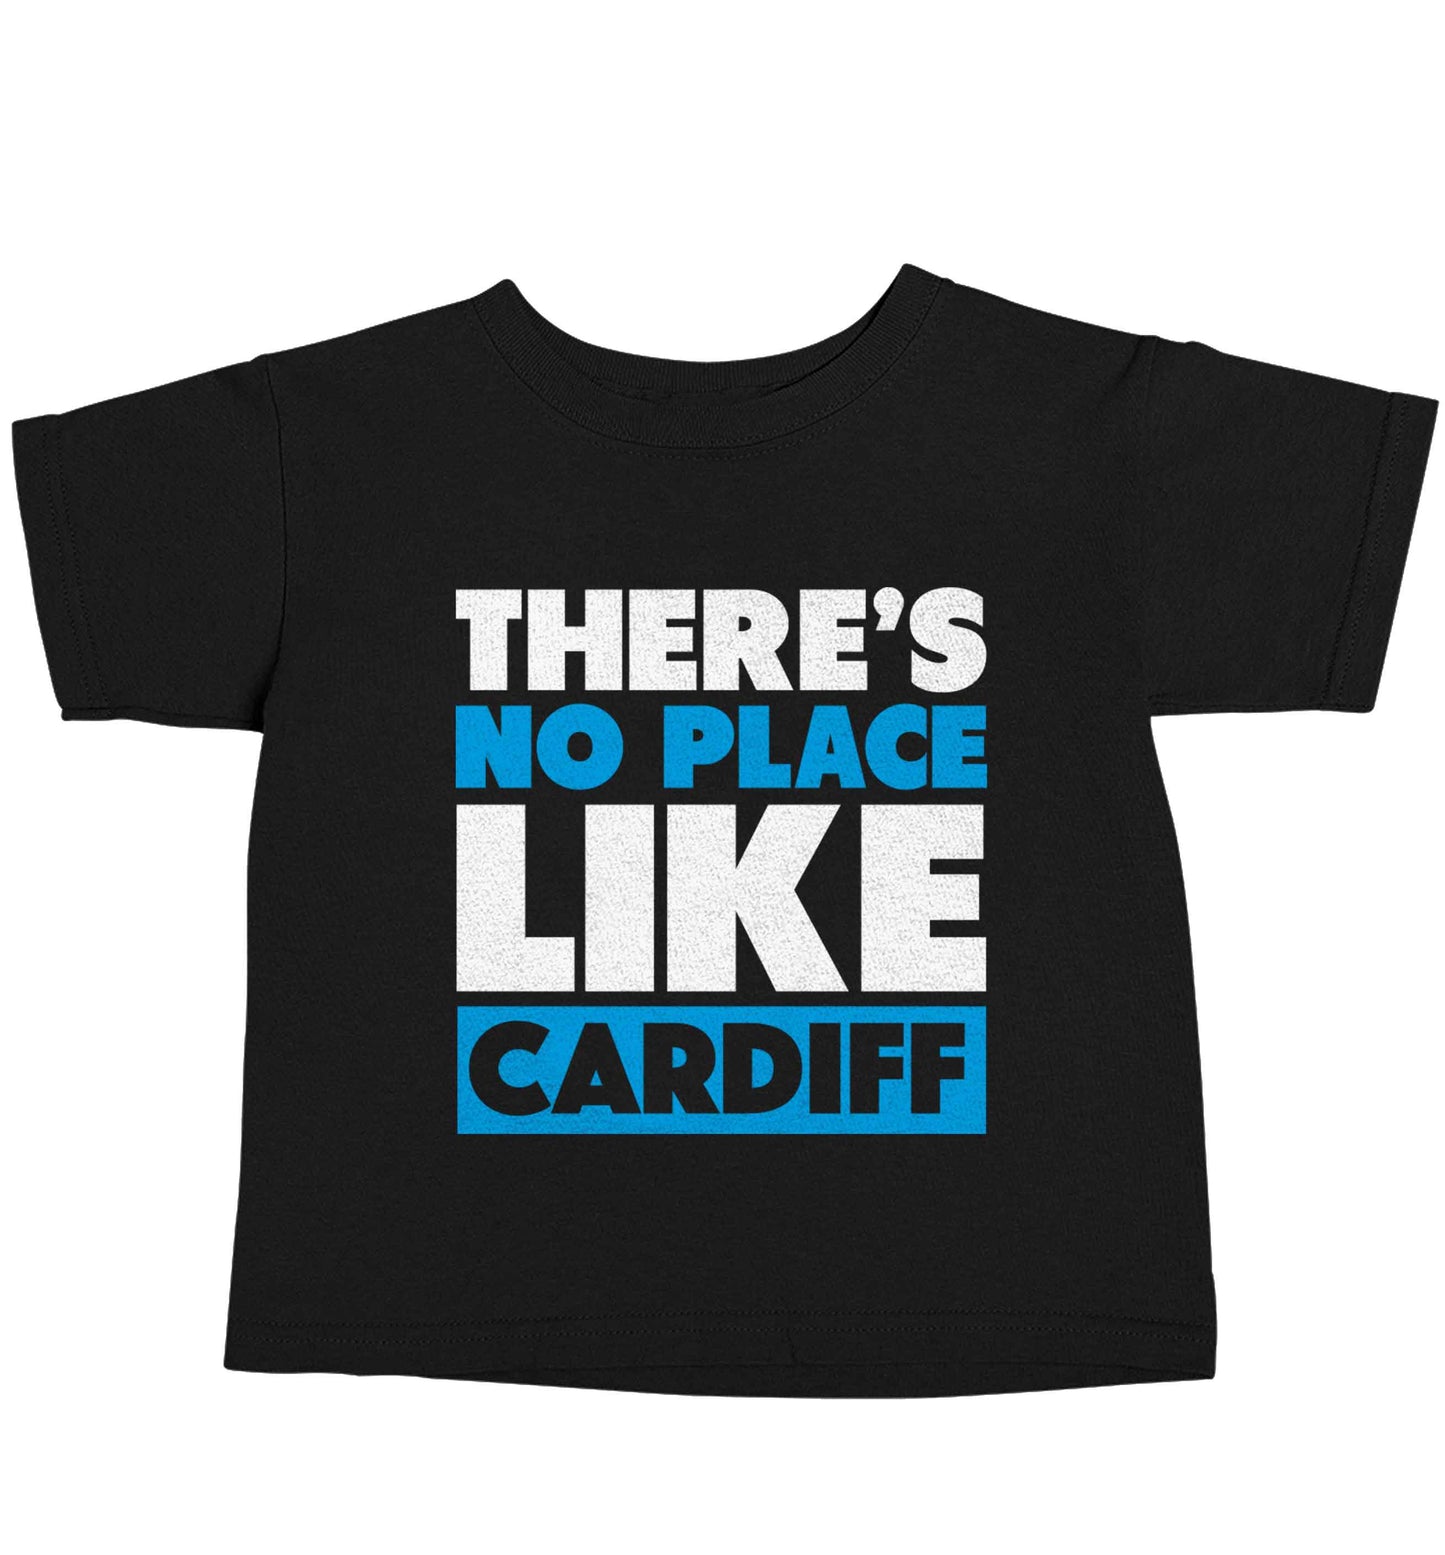 There's no place like Cardiff Black baby toddler Tshirt 2 years